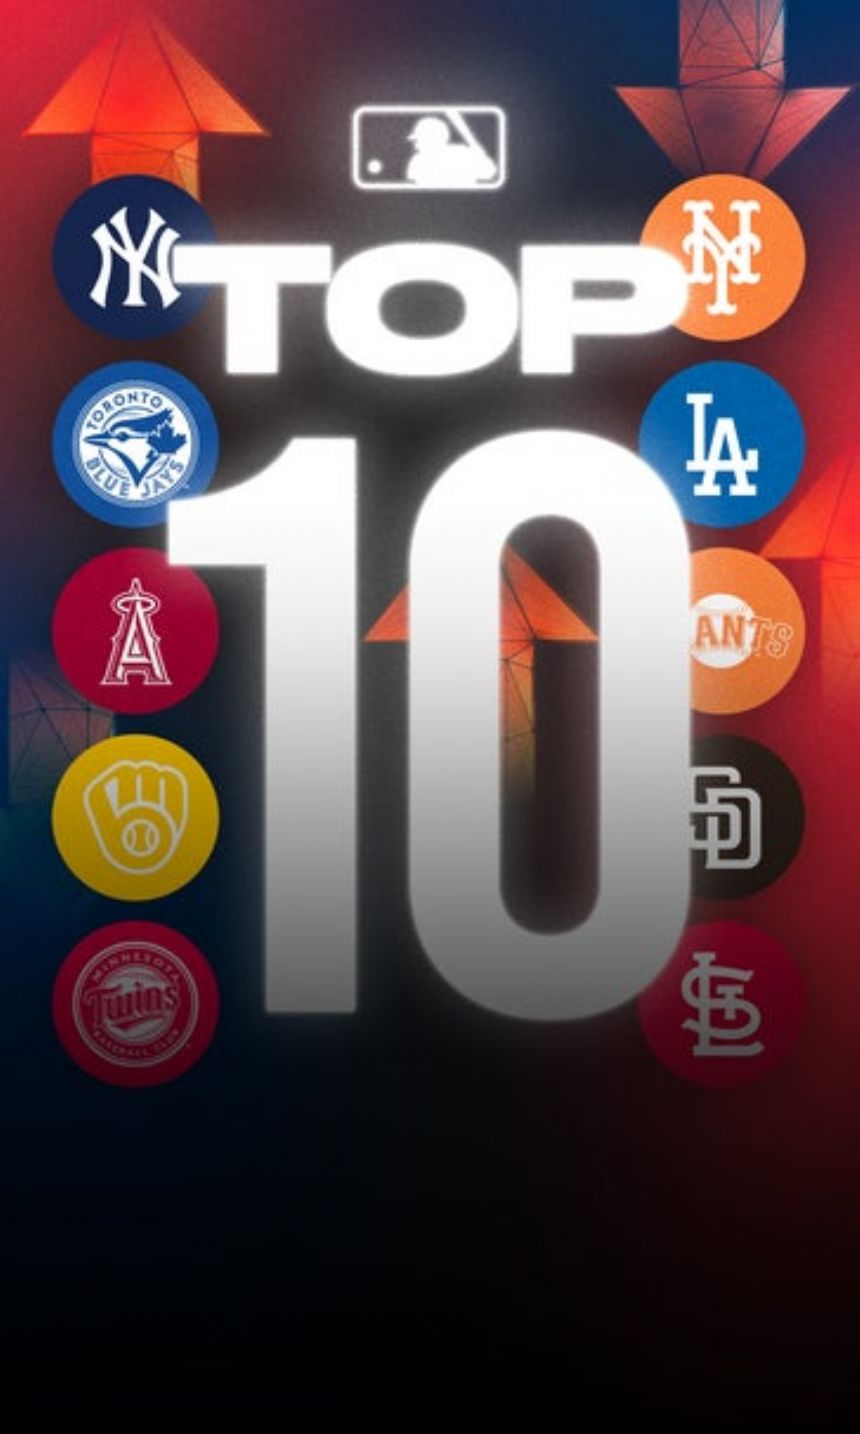 MLB Top 10 Yankees, Mets cruise to the top of the rankings Monday